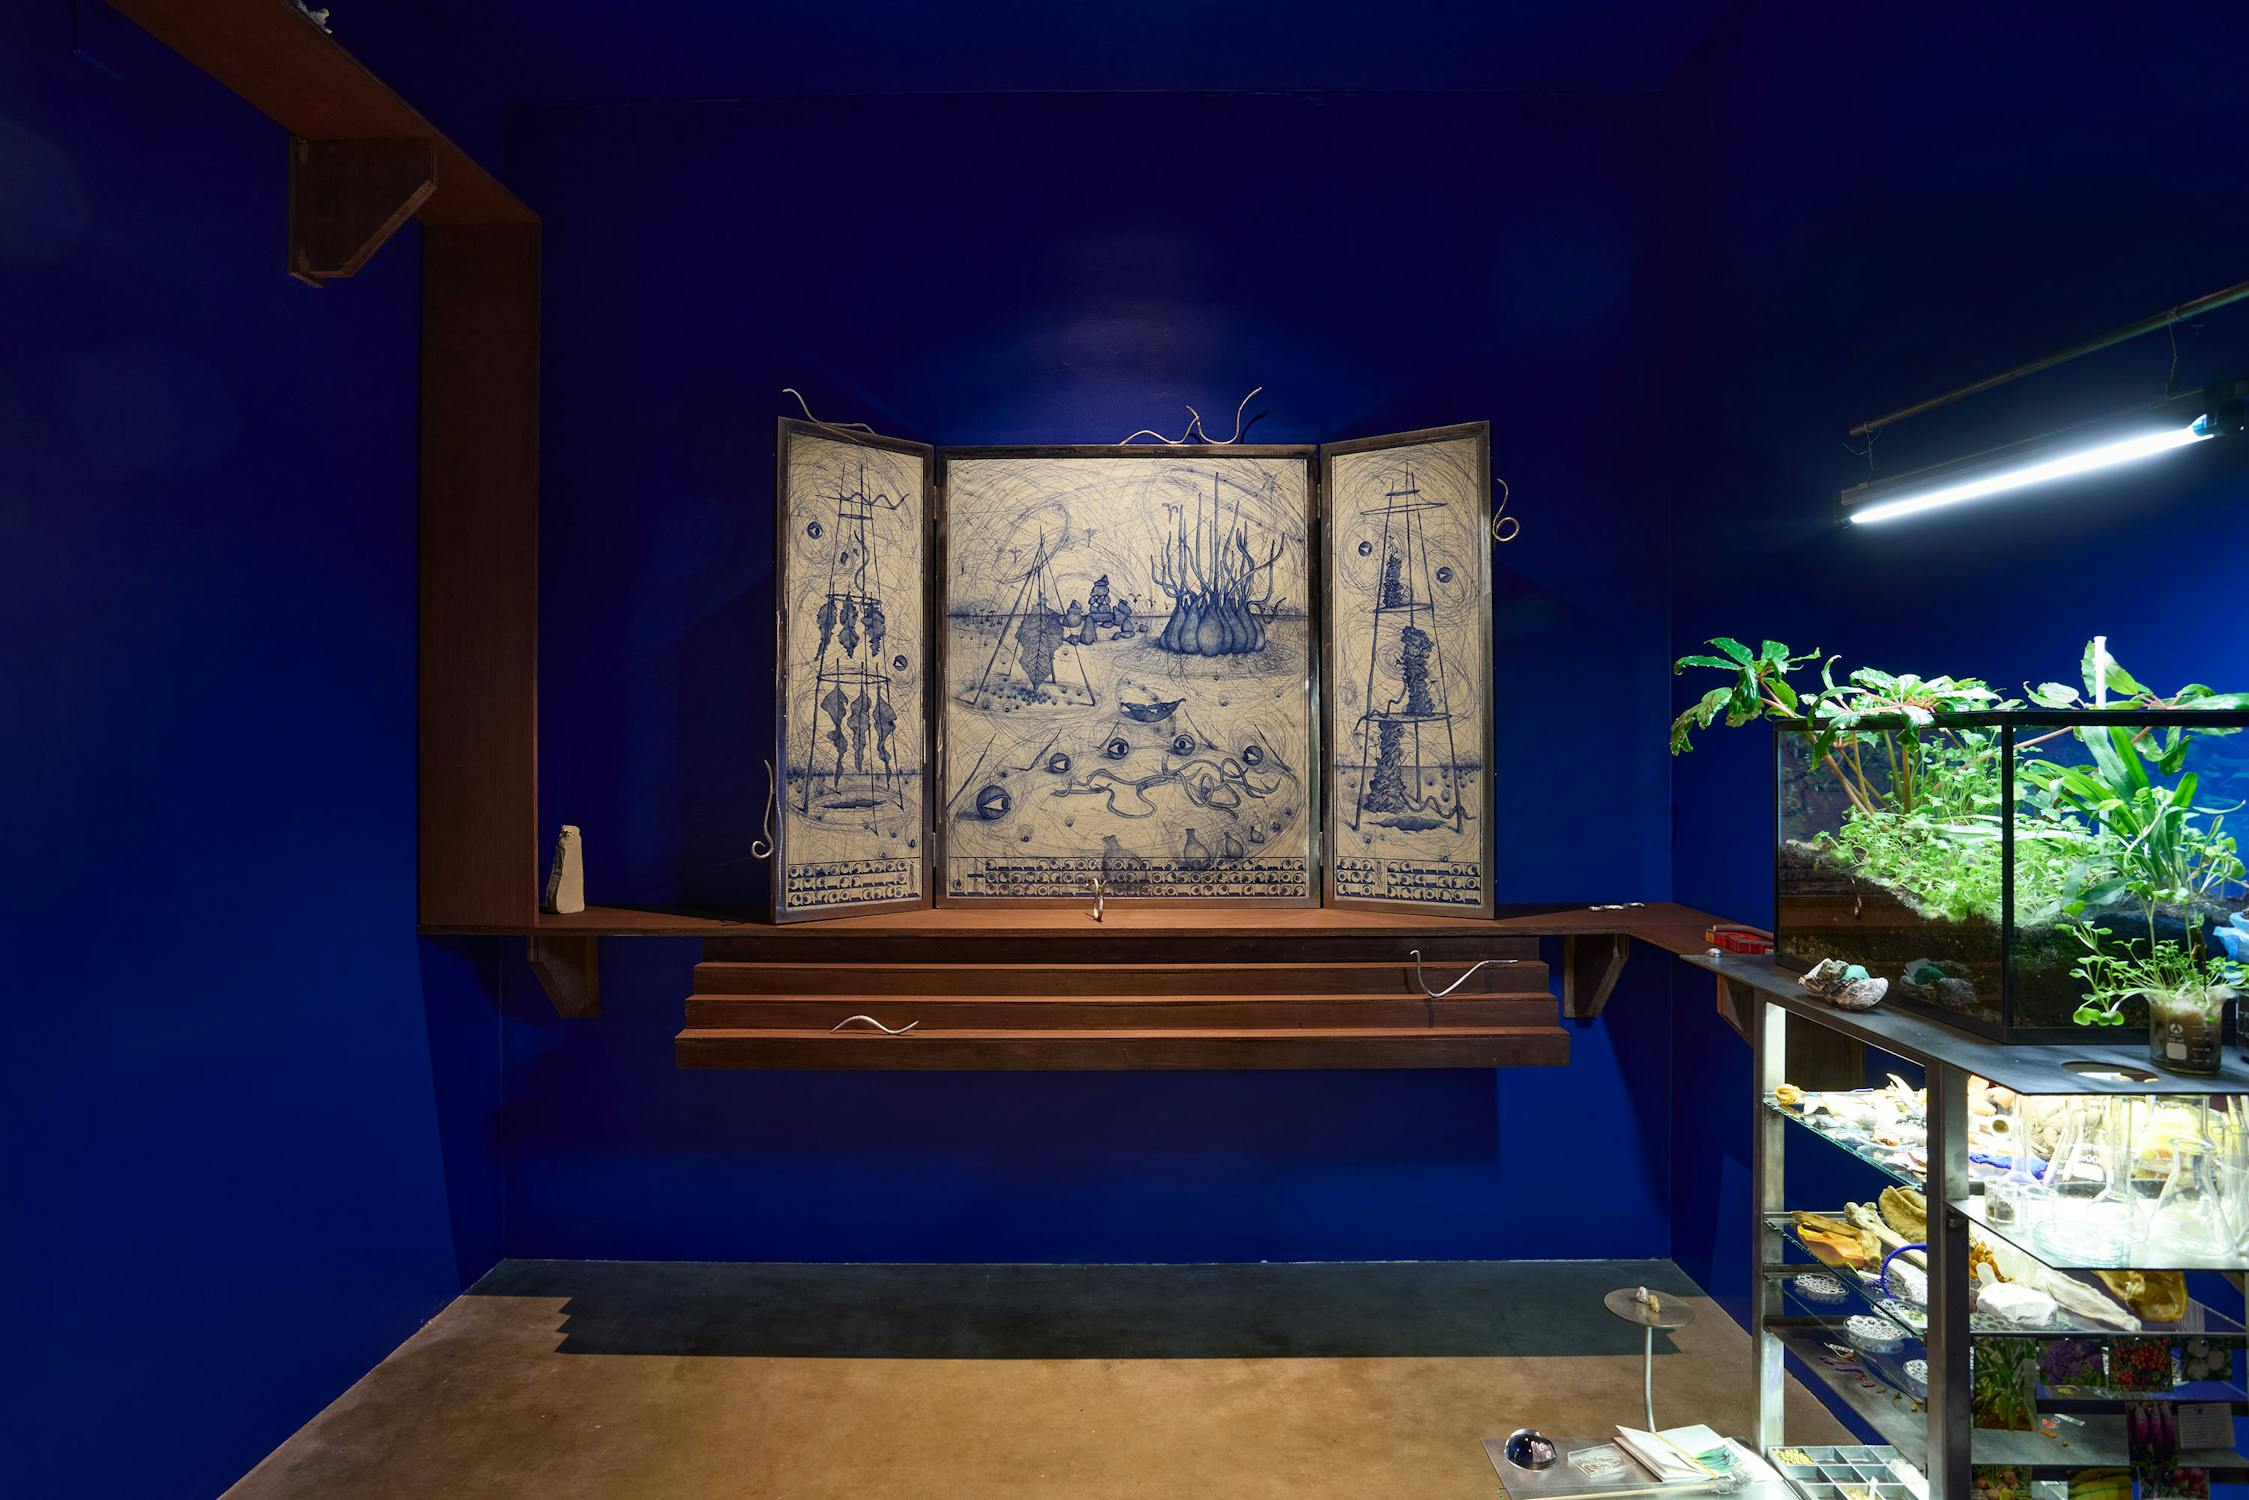 An installation including a triptych frame containing a drawing in blue ink installed on a wooden shelf with miniature steps